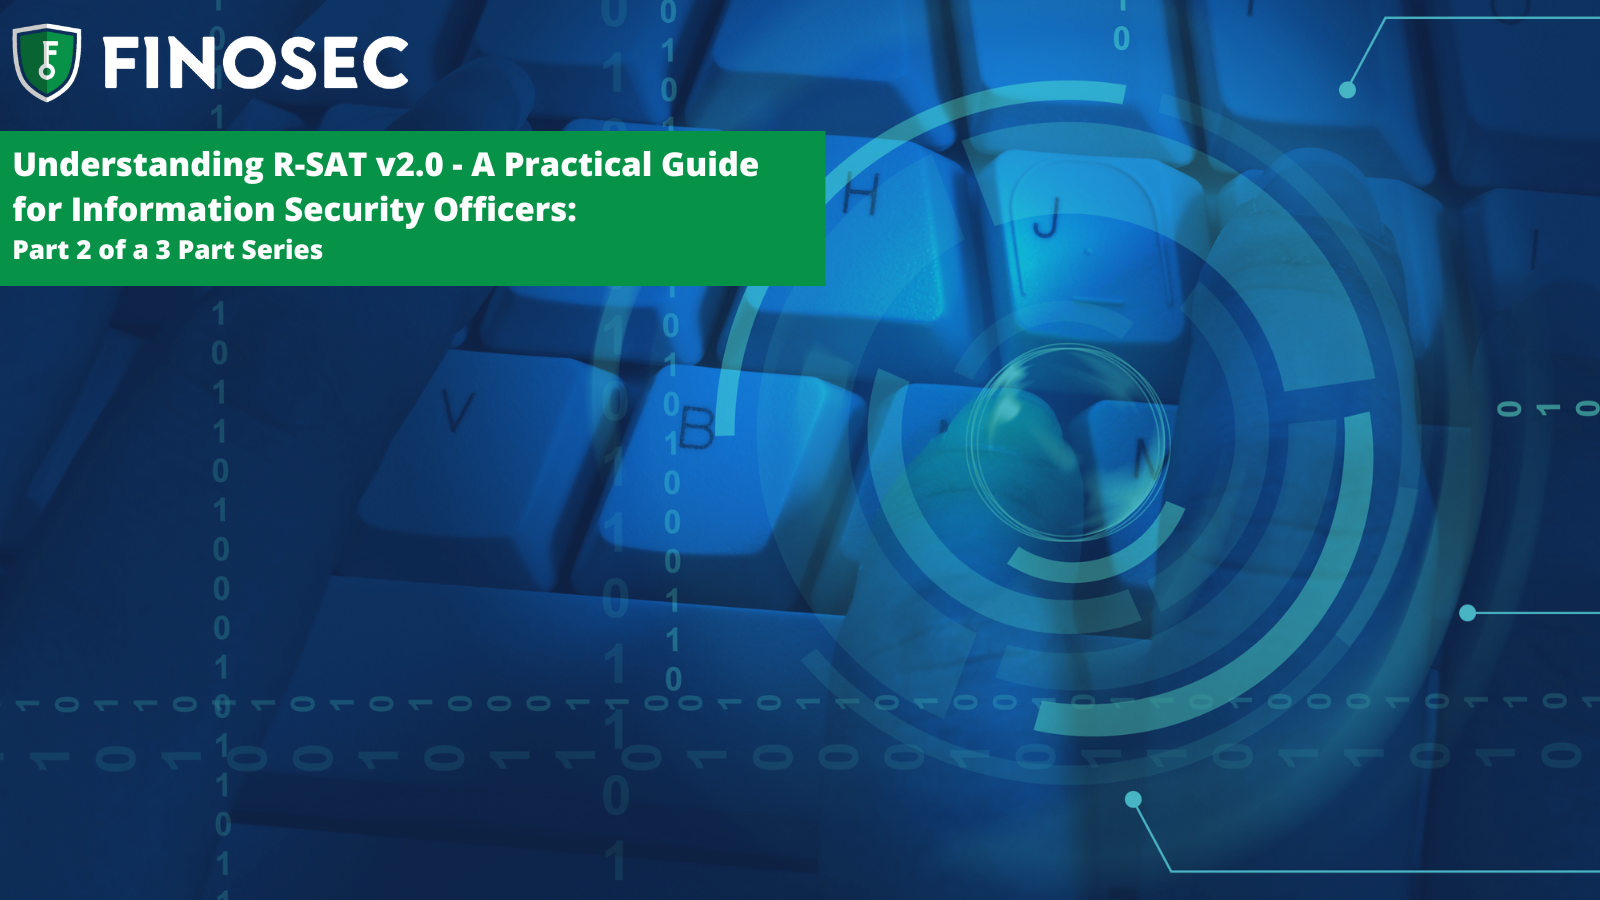 Understanding R-SAT v2.0 - A Practical Guide for Information Security Officers Part 2 of a 3 Part Series 